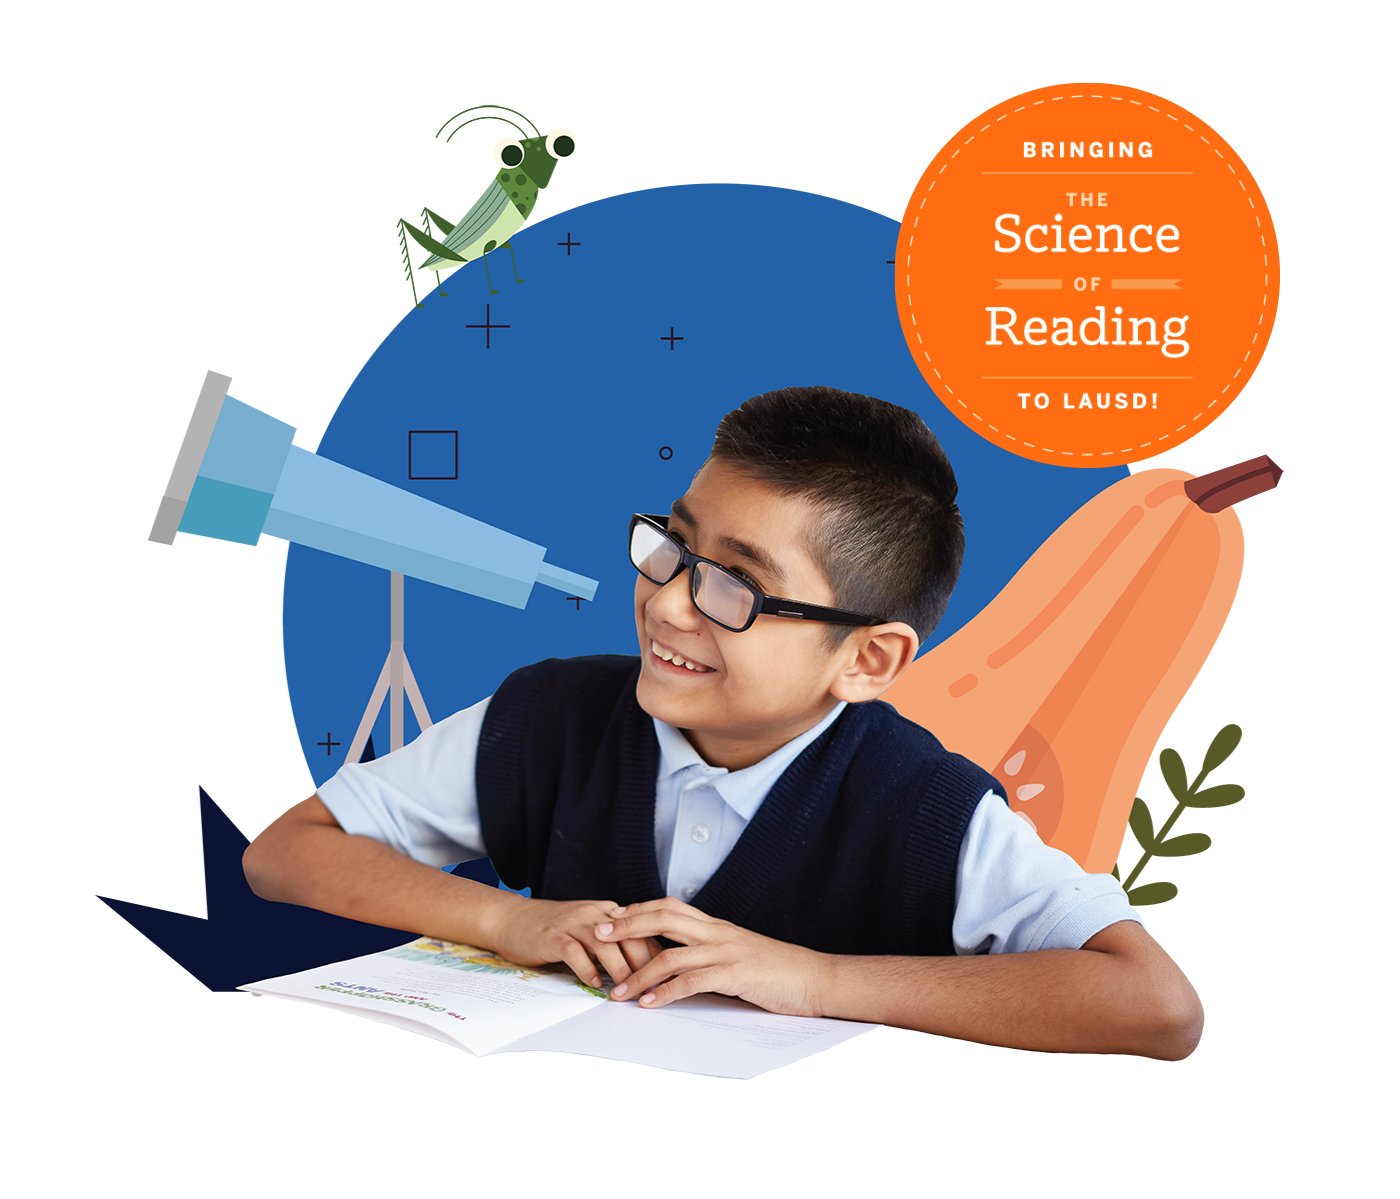 A boy in glasses reading a book, surrounded by illustrations of a telescope, grasshopper, and carrot, with a logo saying 